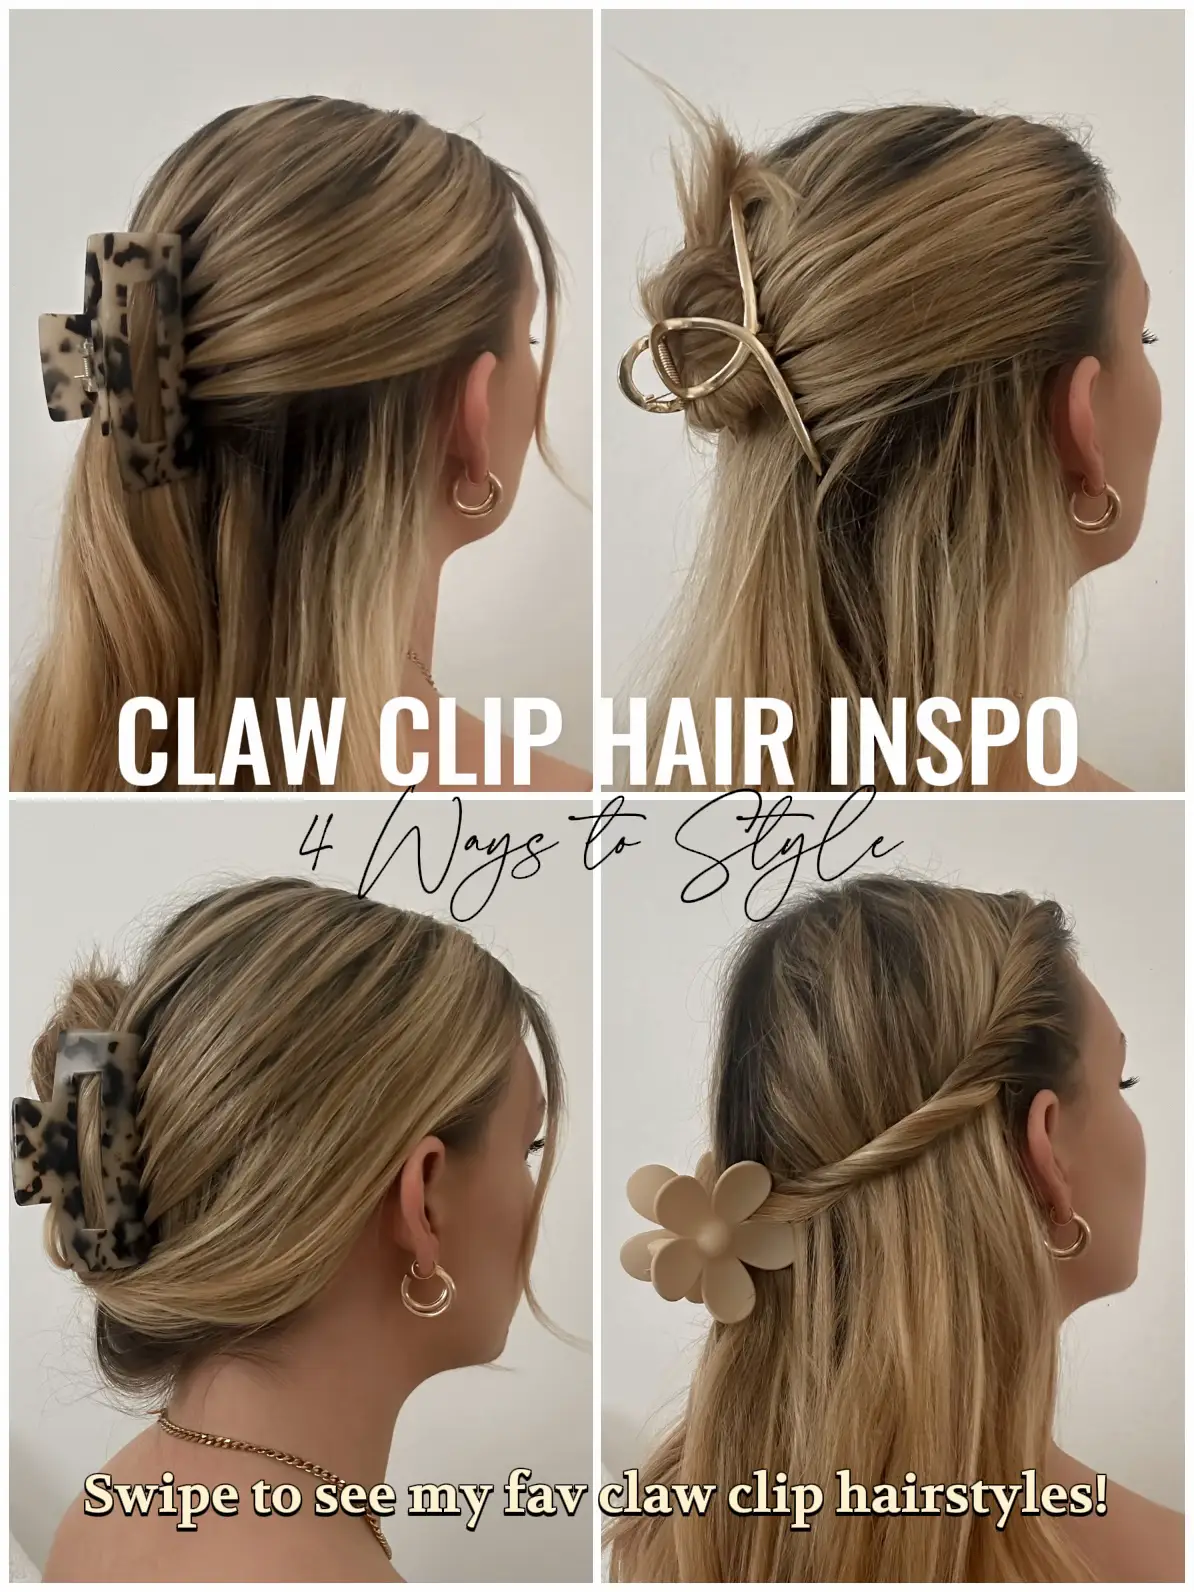 4 ways to style a Claw Clip ✨  Gallery posted by Jordan Ellis